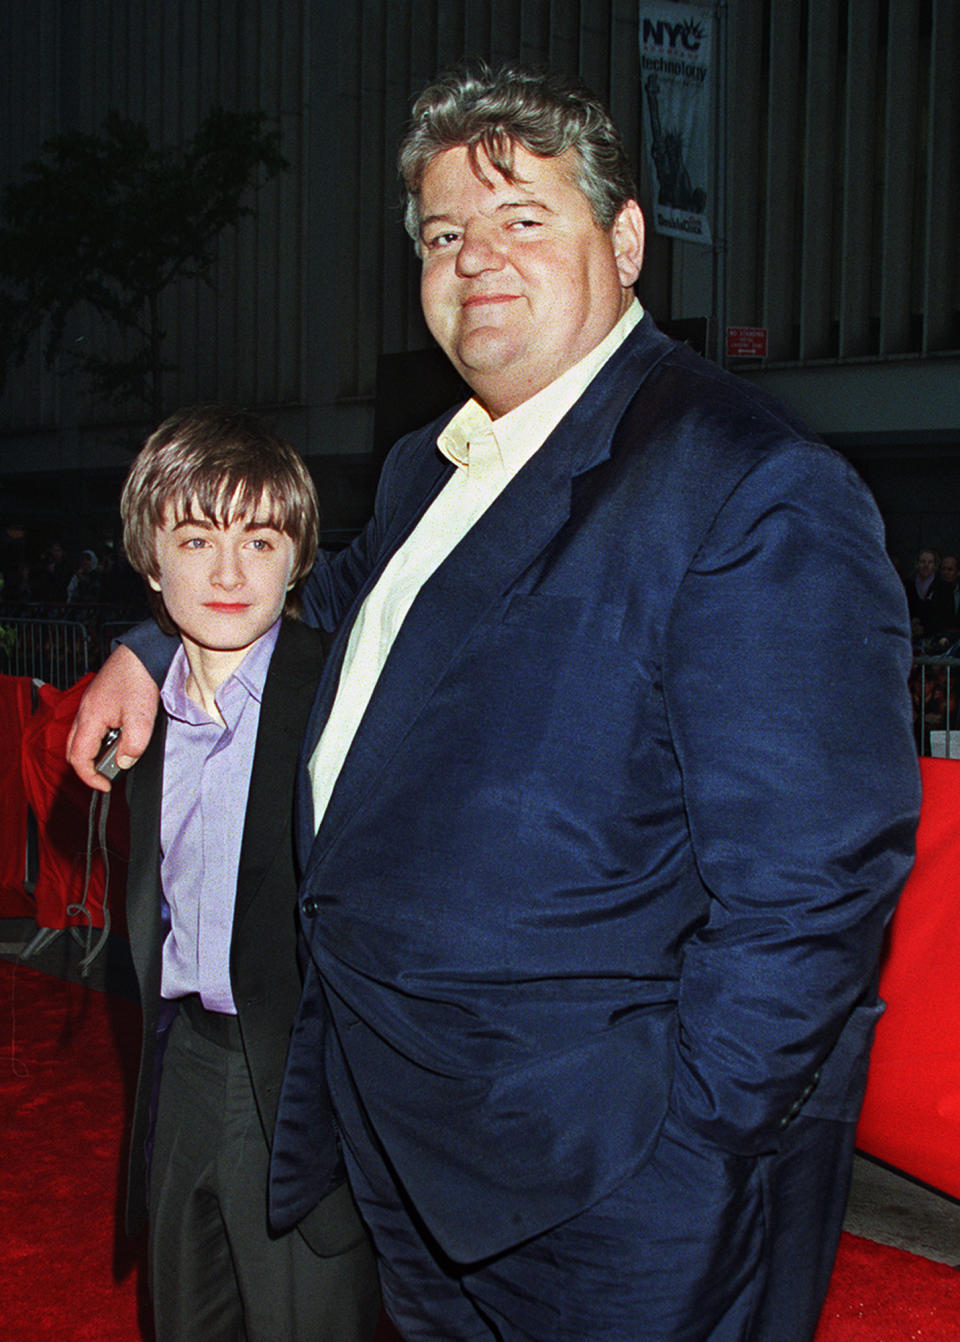 FILE - Daniel Radcliffe, left, who plays Harry Potter in the new movie "Harry Potter and the Sorcerer's Stone," and Robbie Coltrane, who plays Hagrid in the film, arrive for the film's New York premiere on Nov. 11, 2001. Coltrane, who played a forensic psychologist on TV series “Cracker” and Hagrid in the “Harry Potter” movies, has died. Coltrane’s agent Belinda Wright said he died Friday at a hospital in Scotland. He was 72. (AP Photo/Darla Khazei, File)